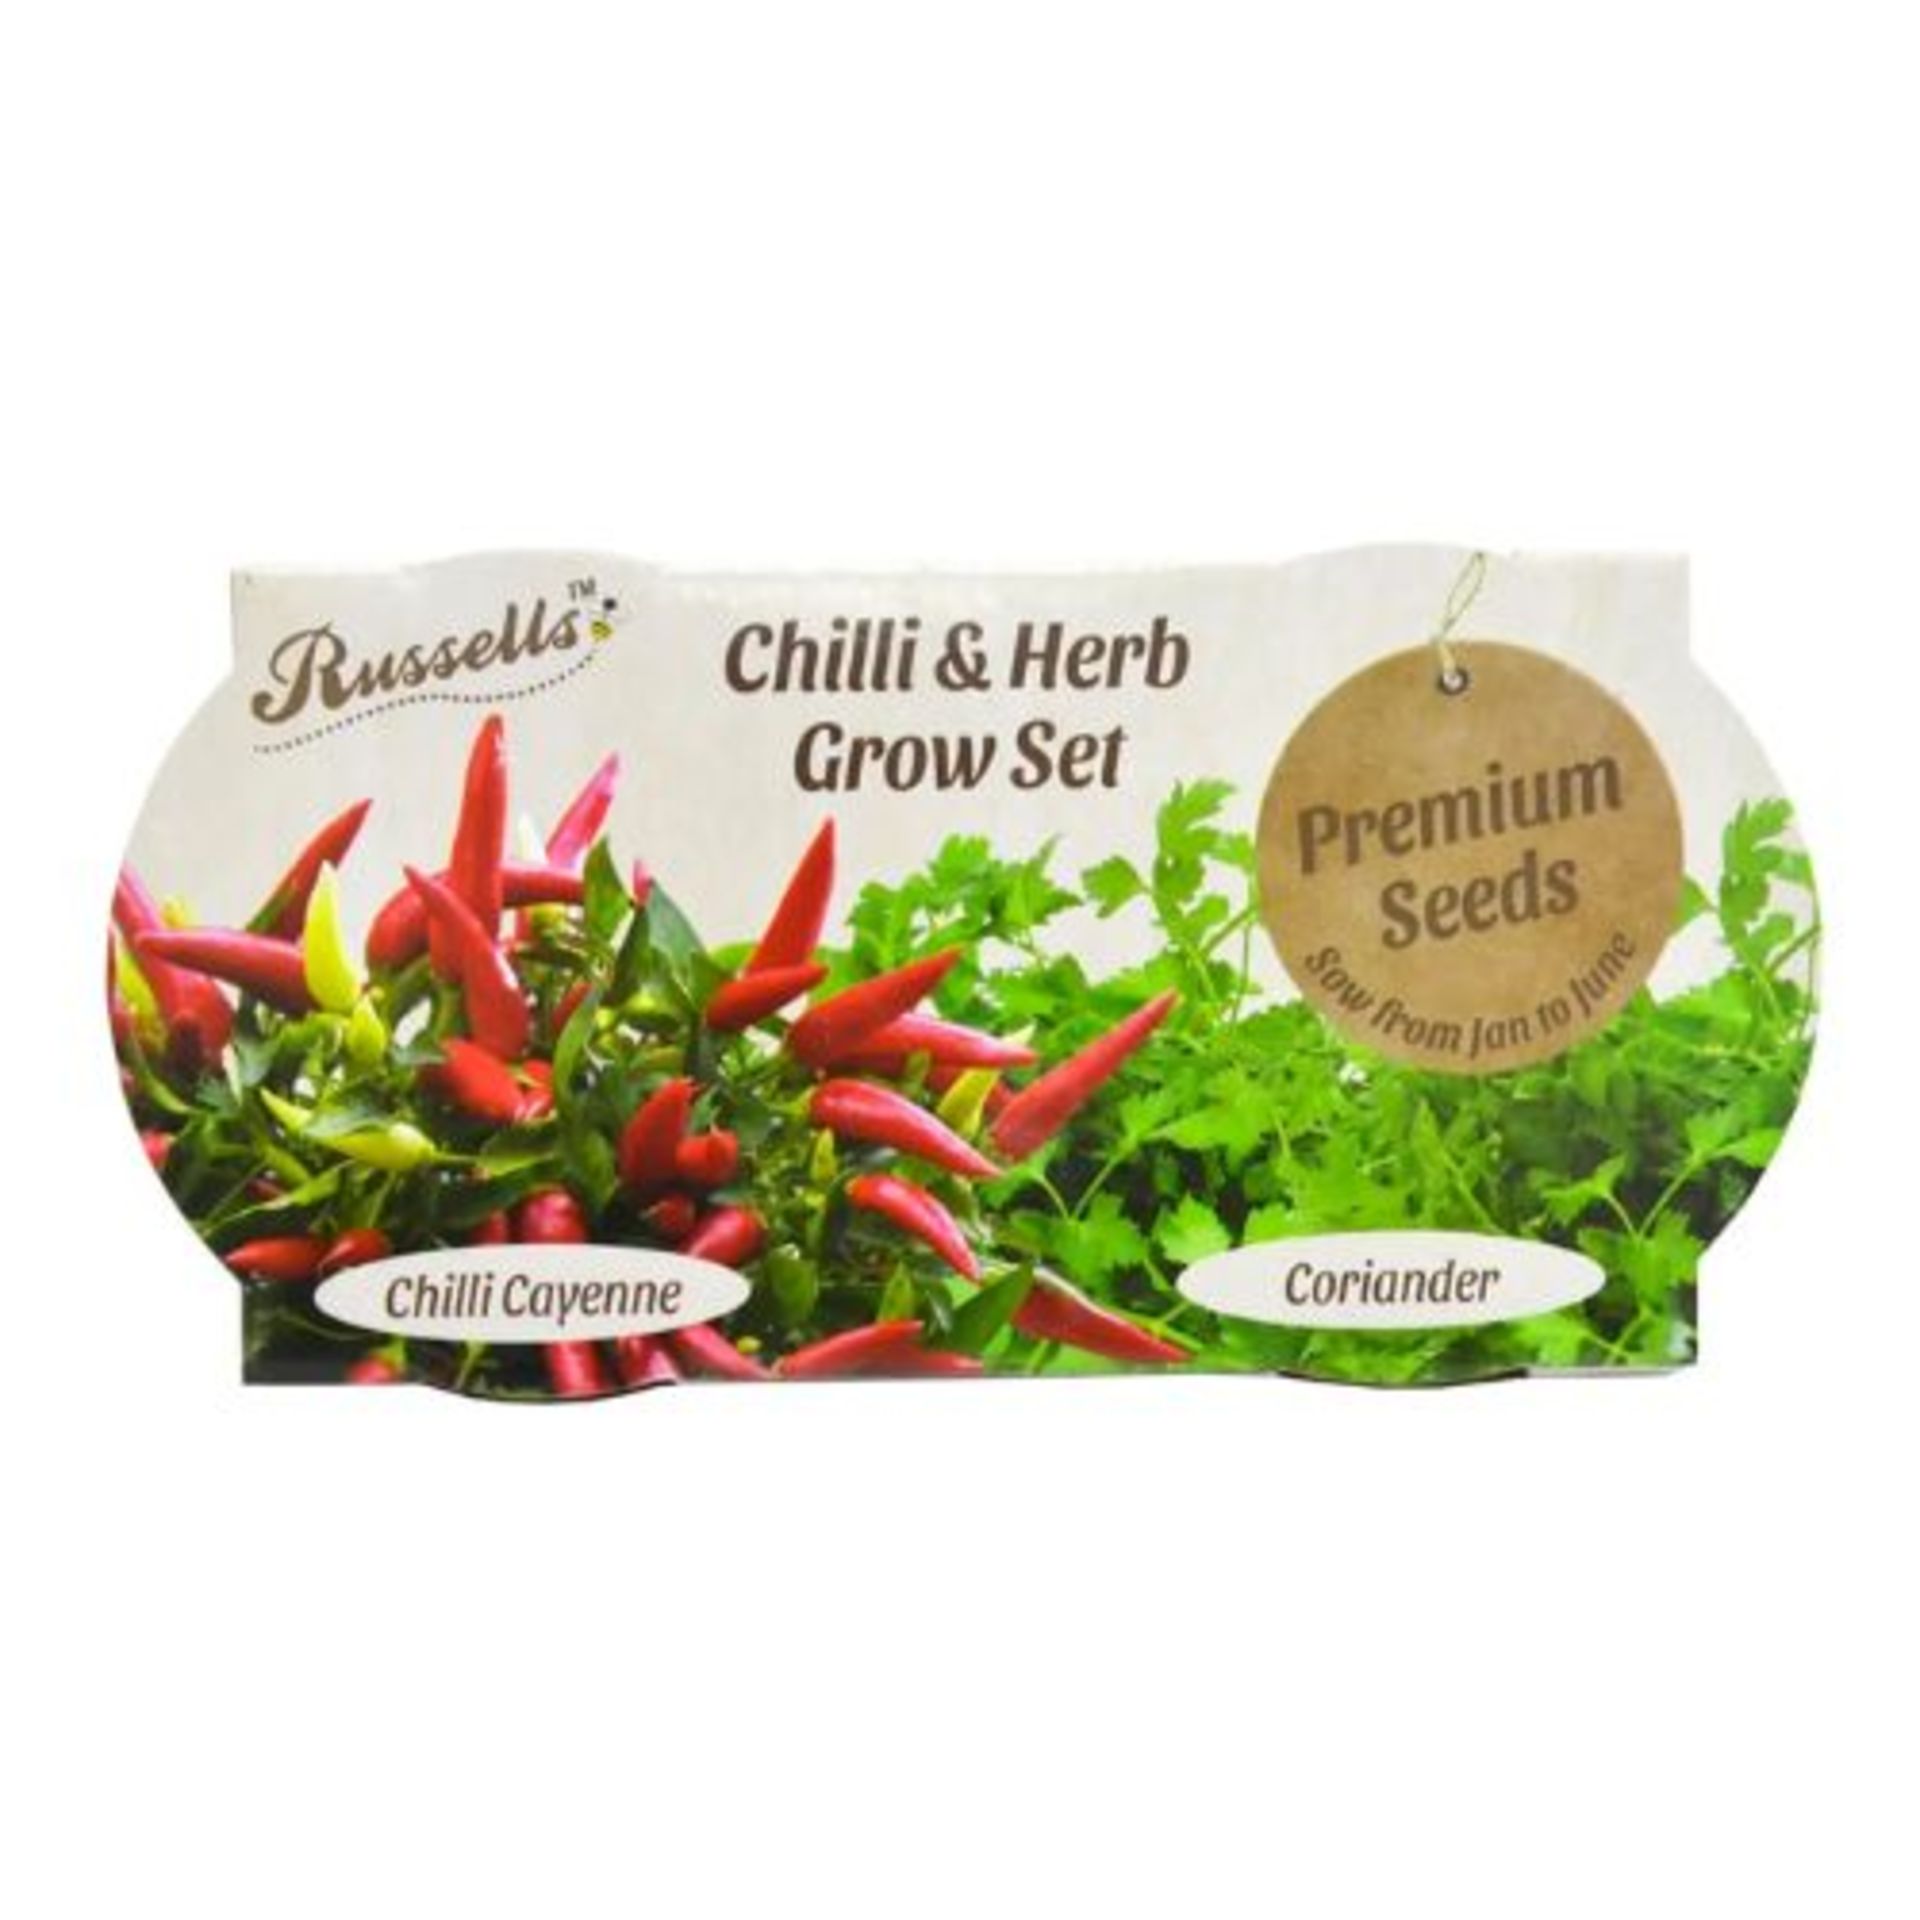 50 X NEW RUSSELLS TWIN TERRACOTTA GROW SETCHILLI & HERB 12S - Image 2 of 2